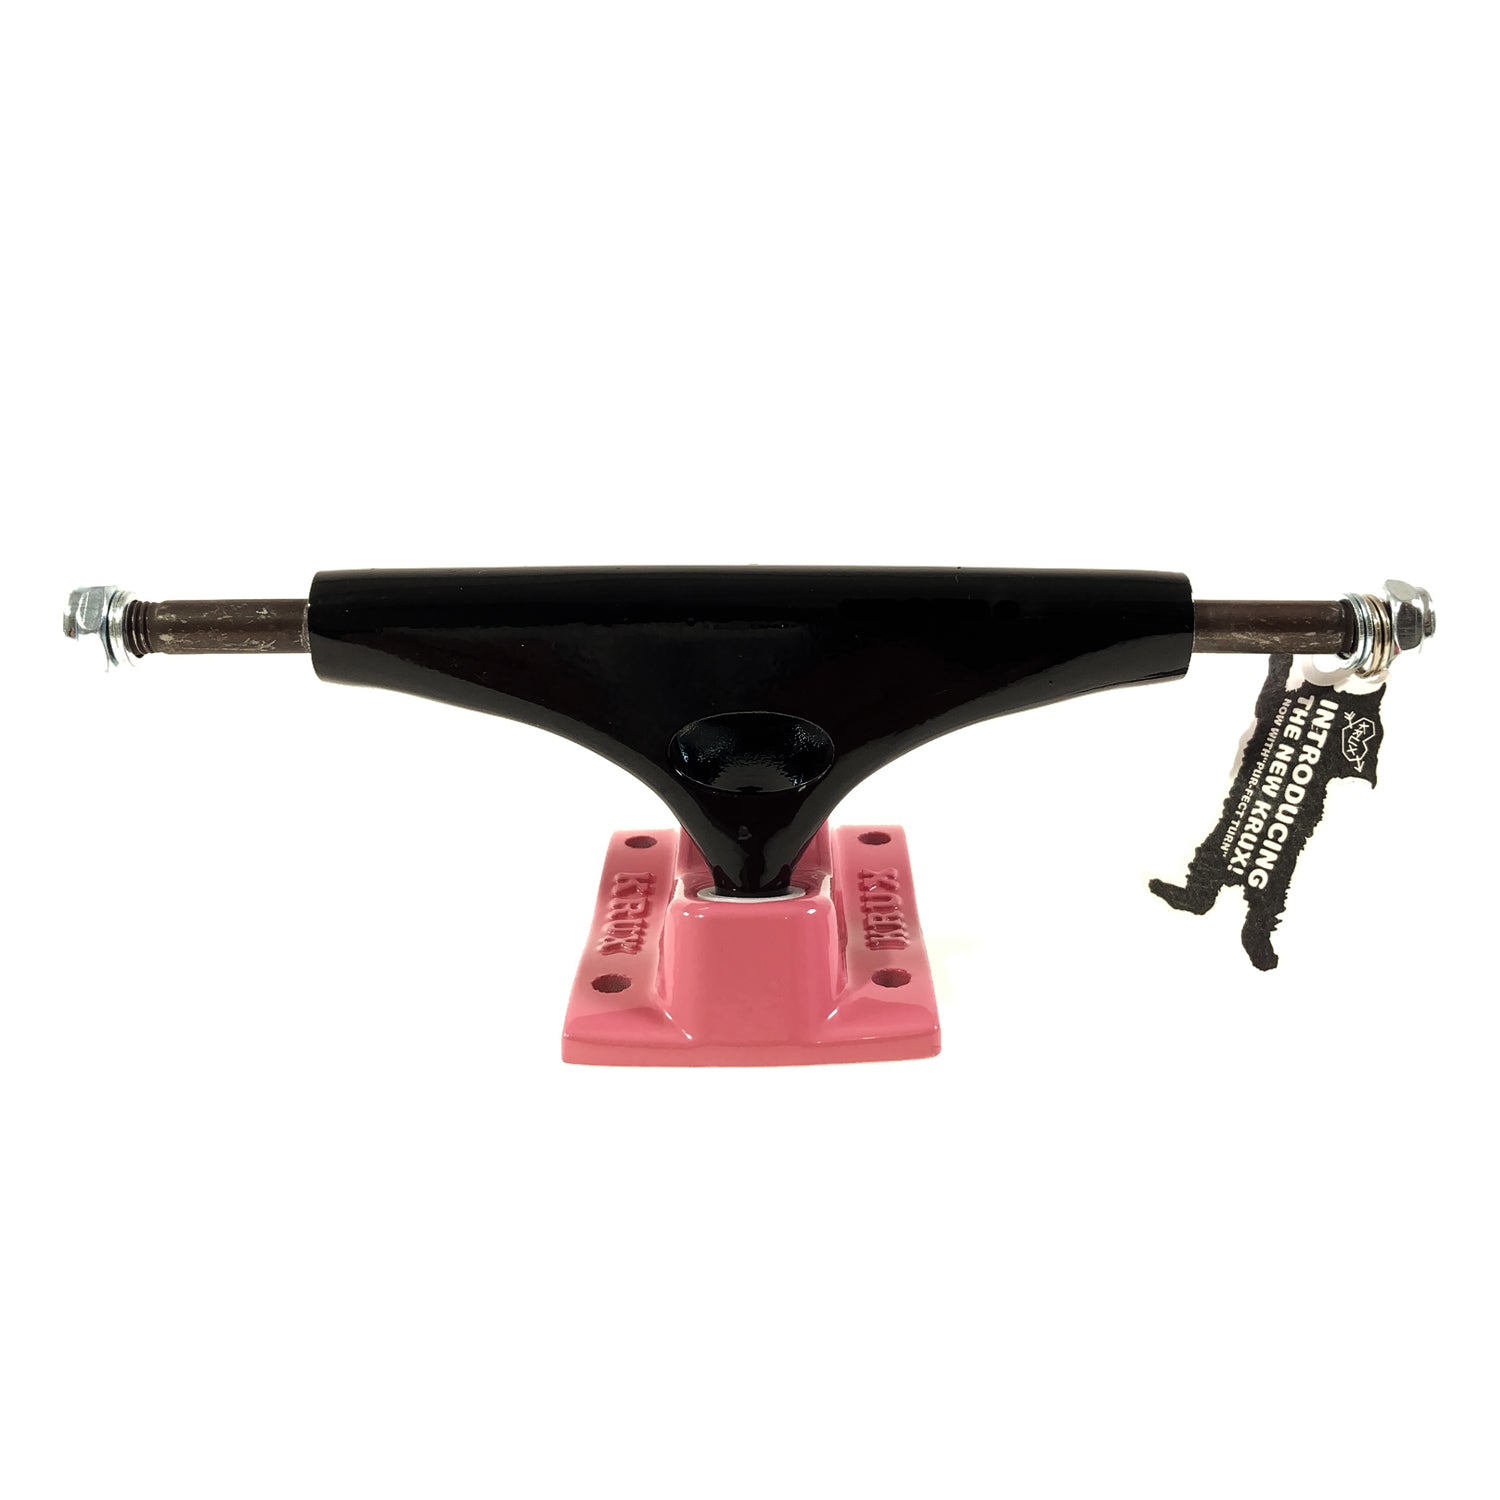 Krux Trucks K5 Standard 7.6 (7.5" to 7.75") - Black / Pink (x 2 / Sold as a pair) - Prime Delux Store